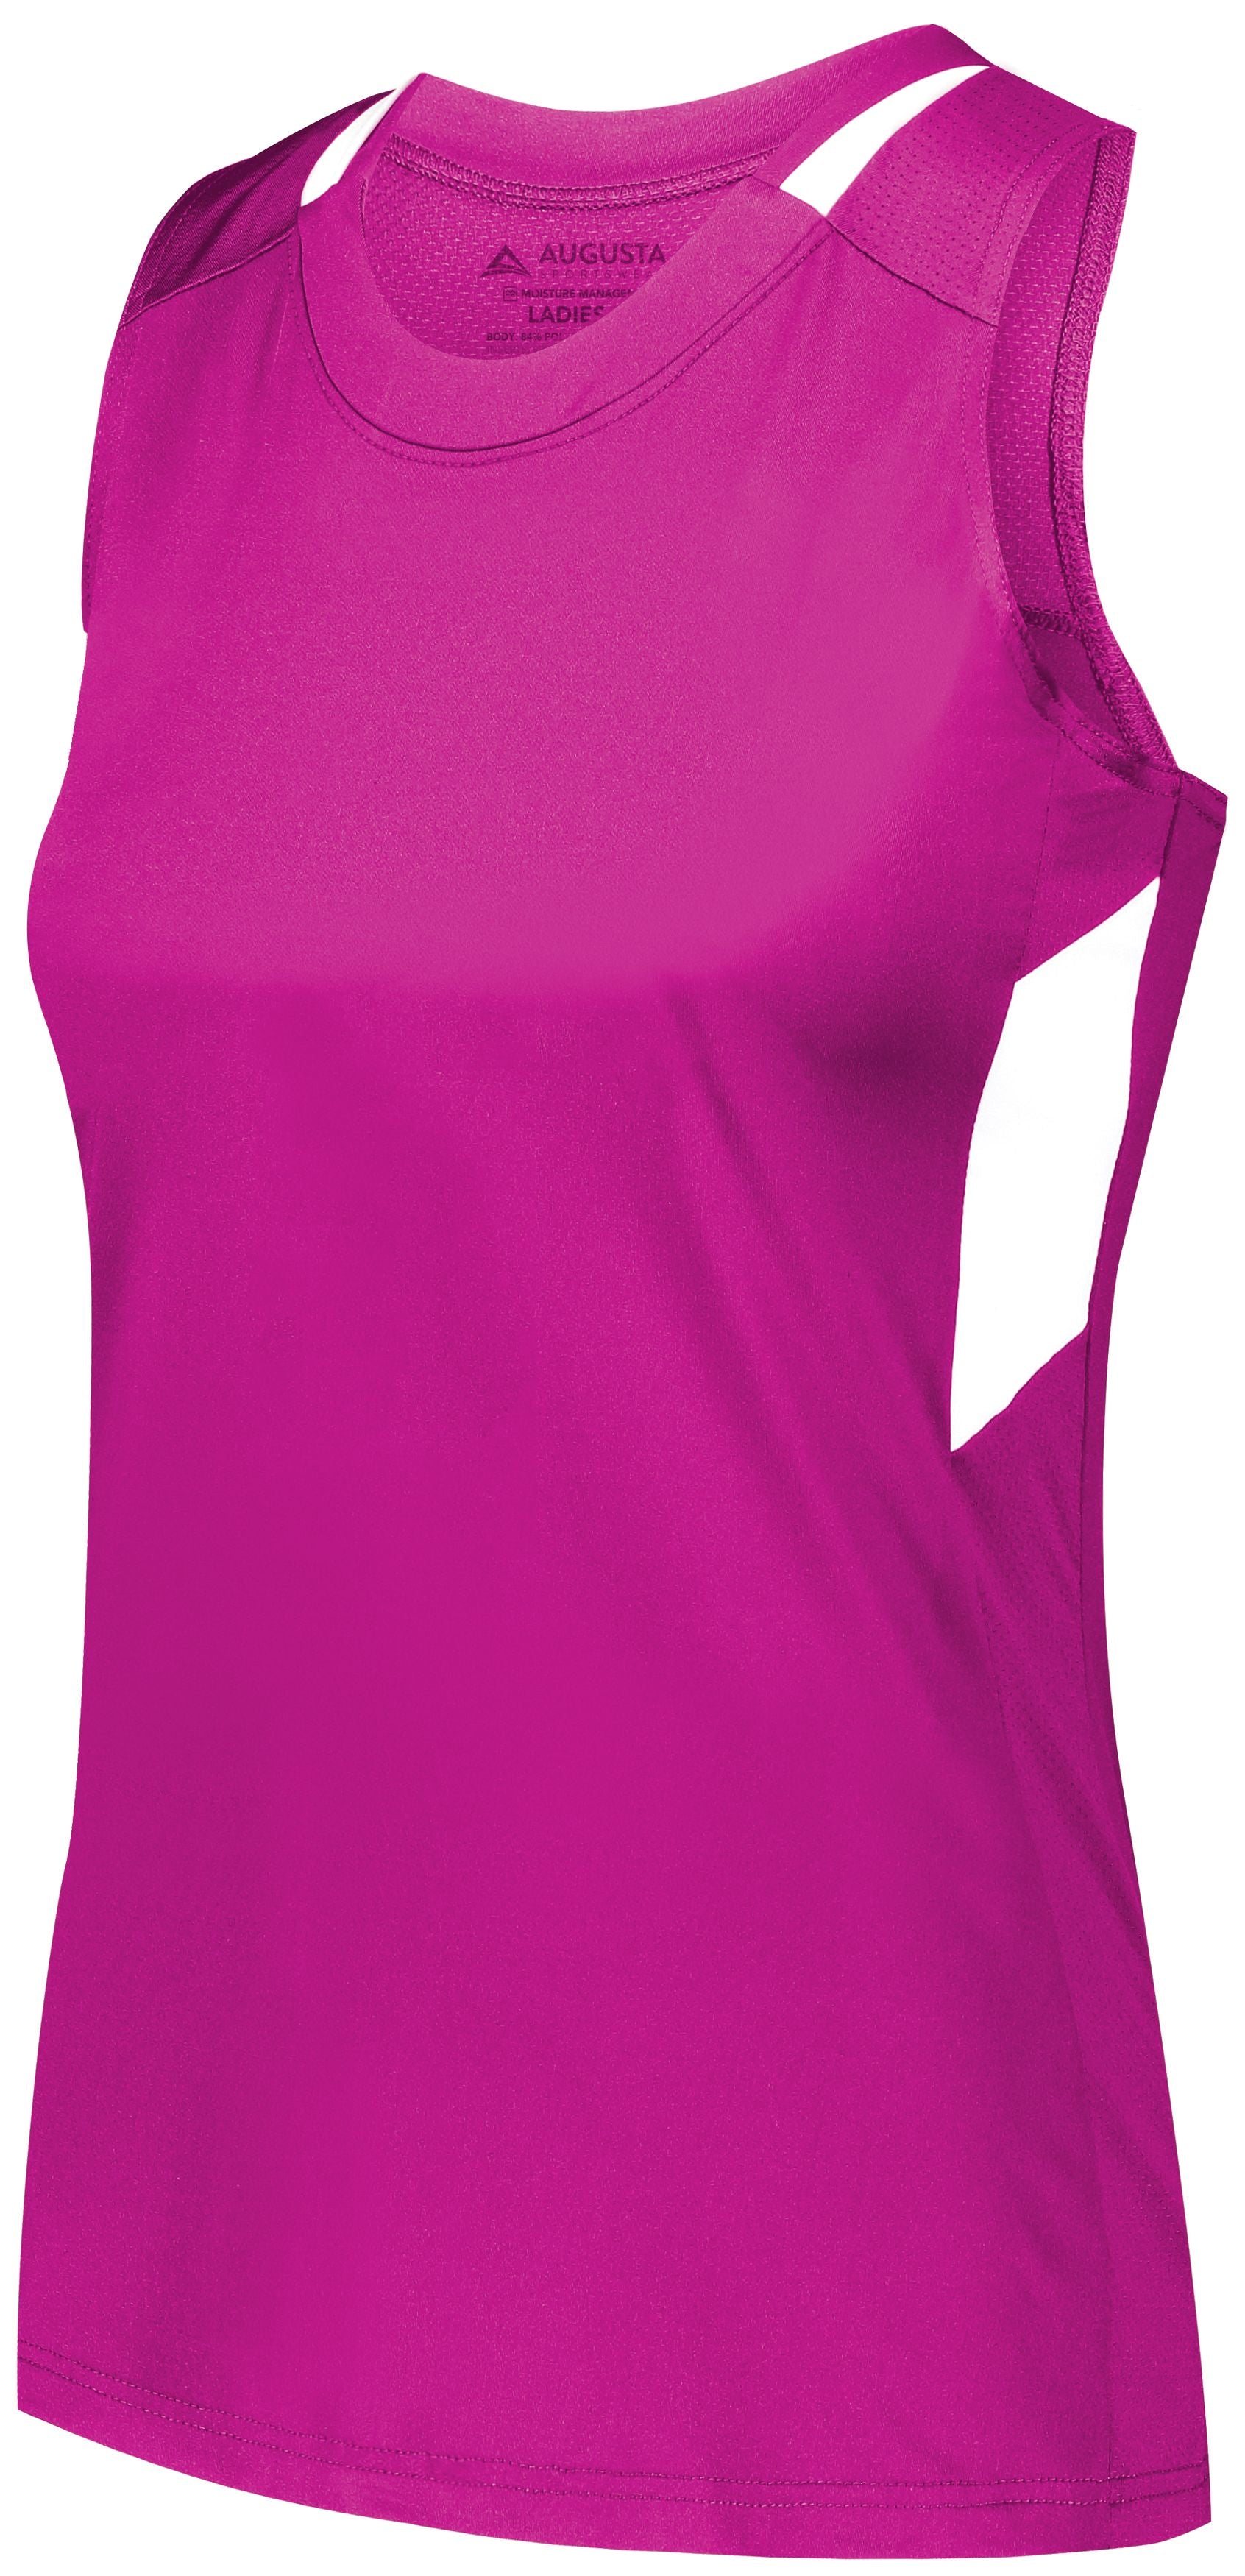 Augusta Sportswear Girls Crossover Tank in Power Pink/White  -Part of the Girls, Augusta-Products, Lacrosse, Girls-Tank, Shirts, All-Sports, All-Sports-1 product lines at KanaleyCreations.com